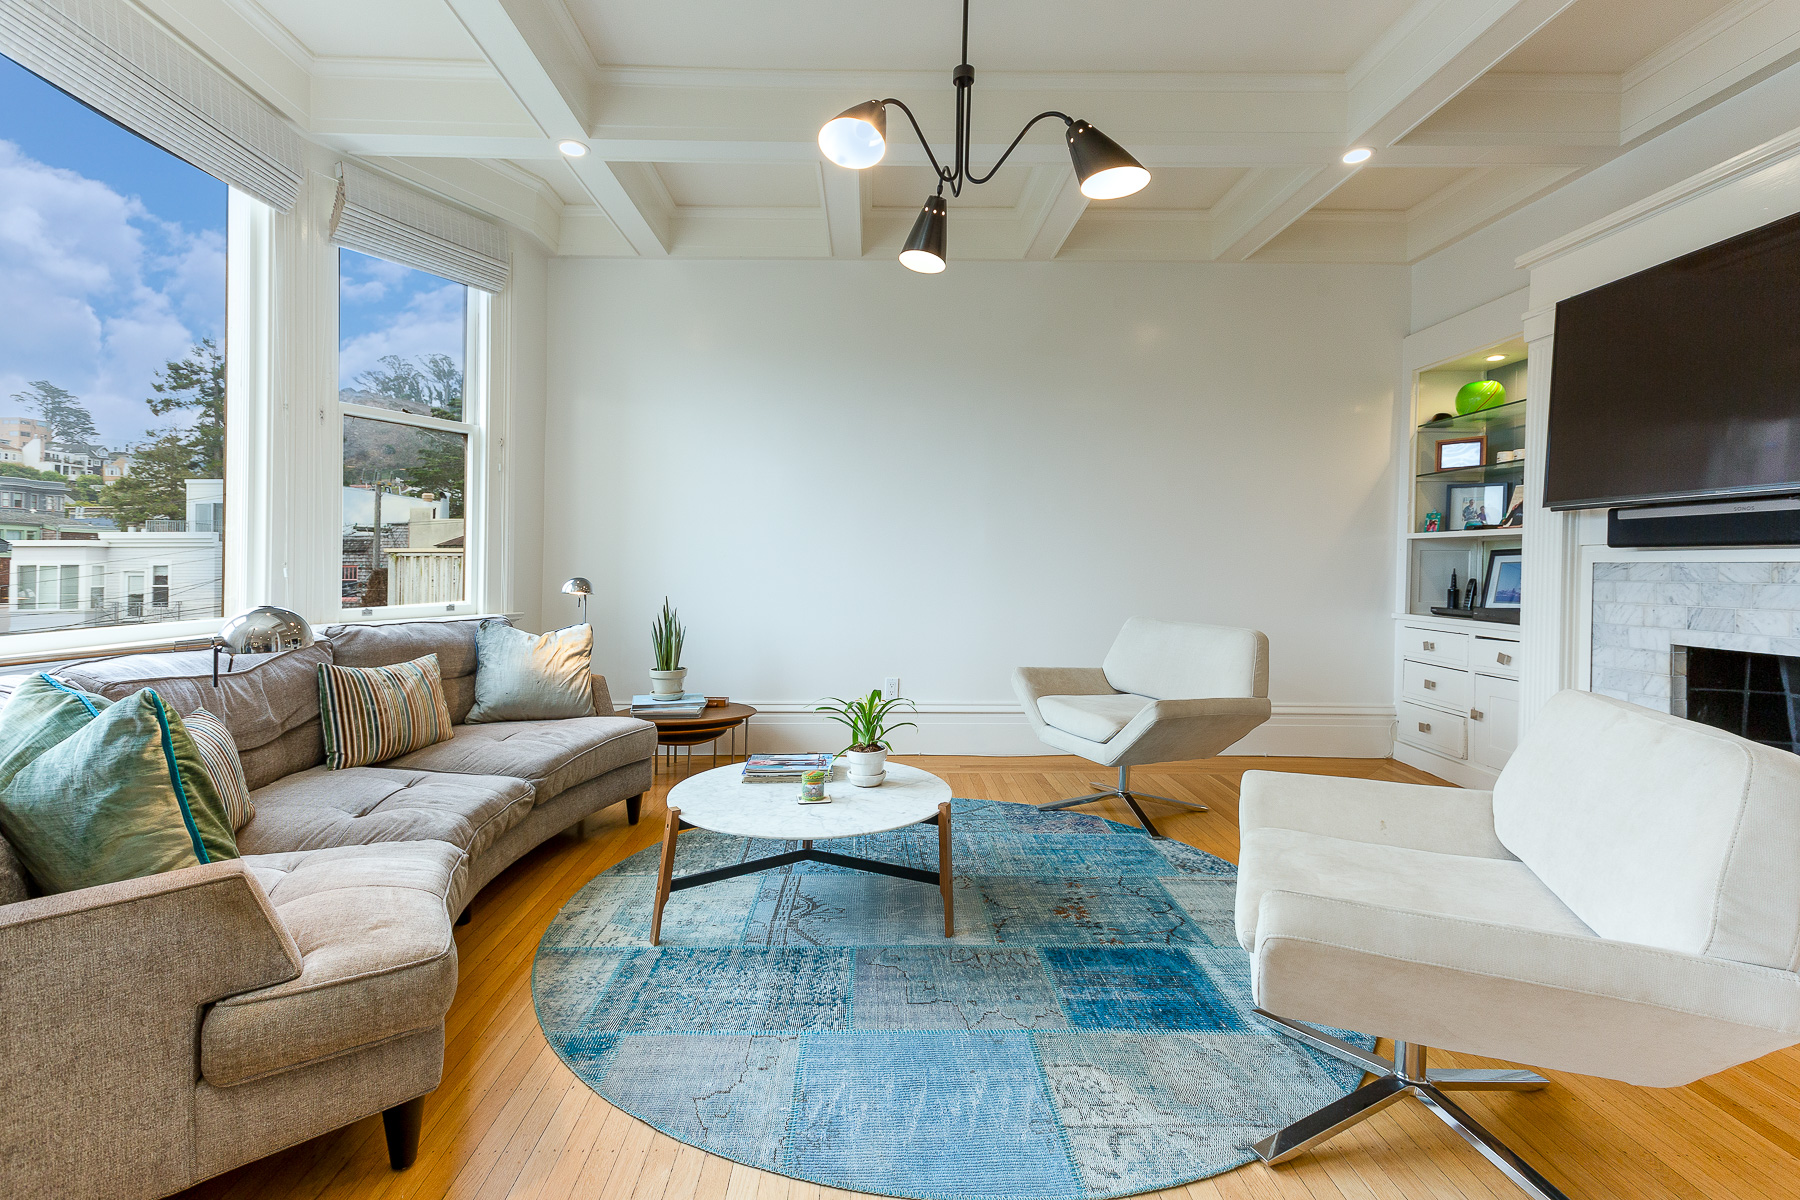 Property Photo: Living room featuring wood floors and box beamed ceilings